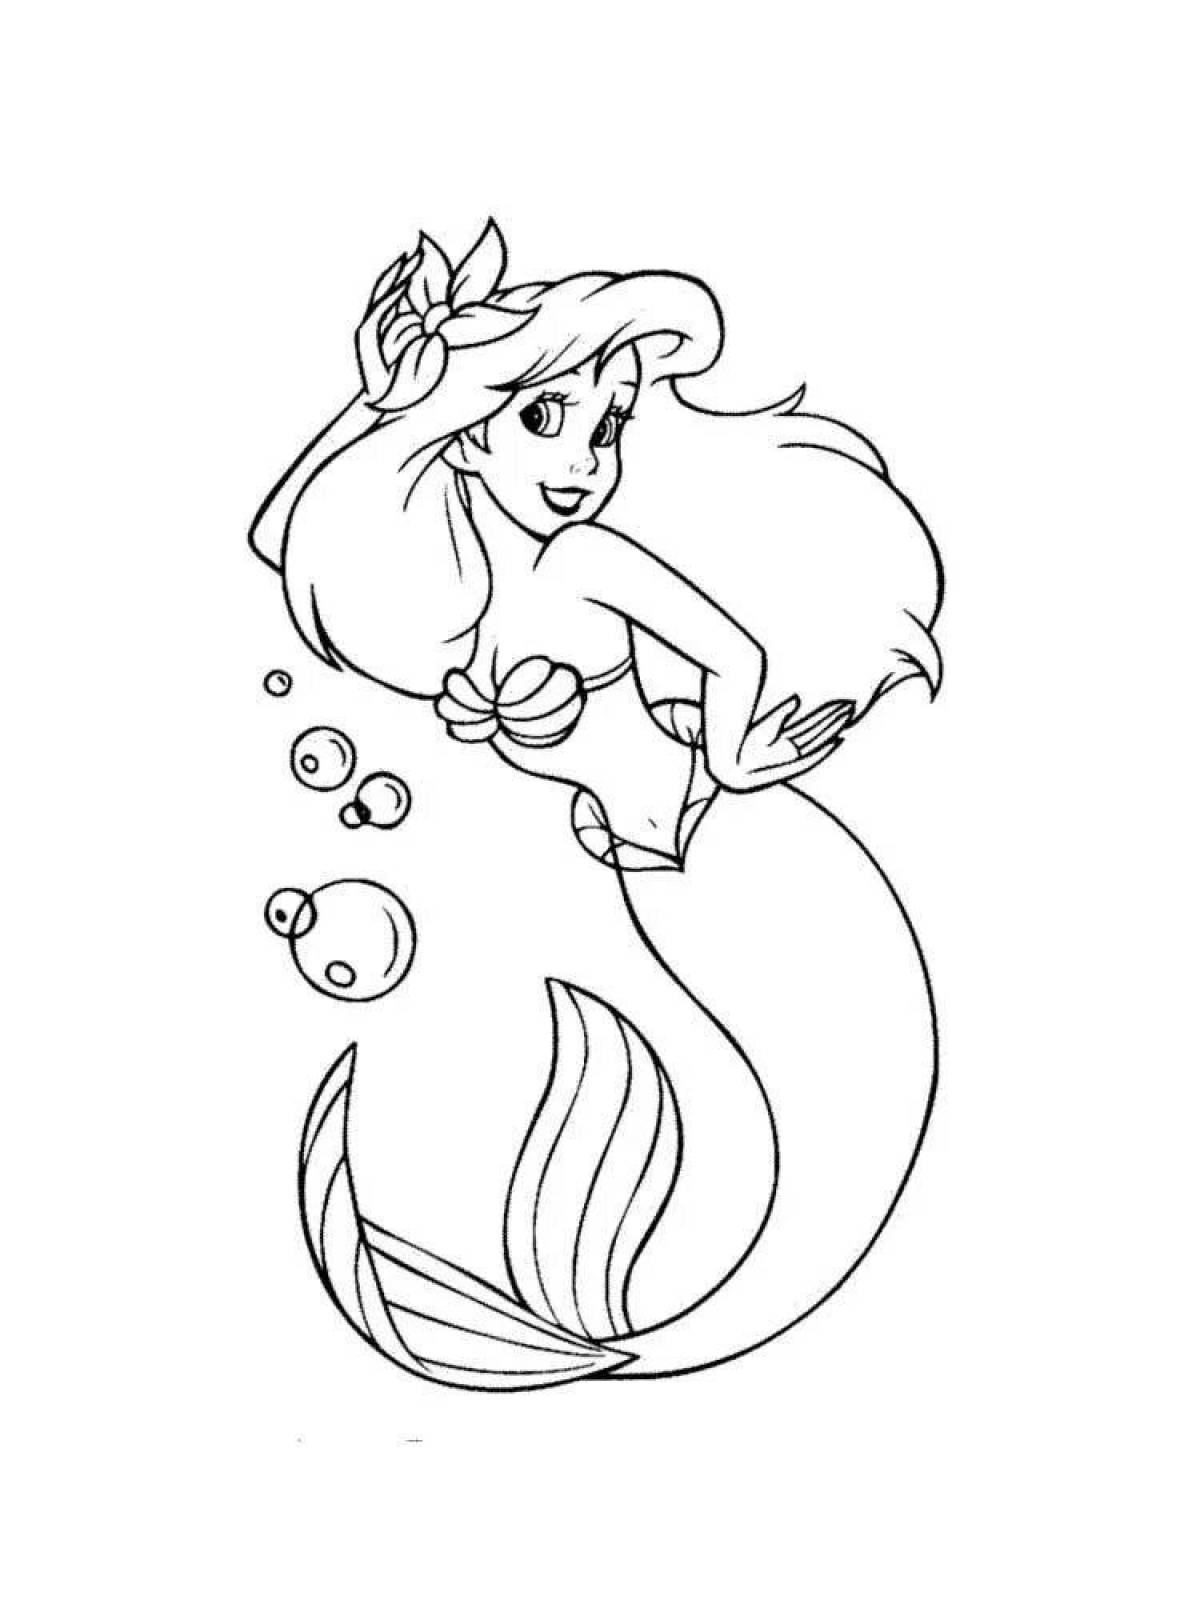 Glowing ariel coloring book for kids